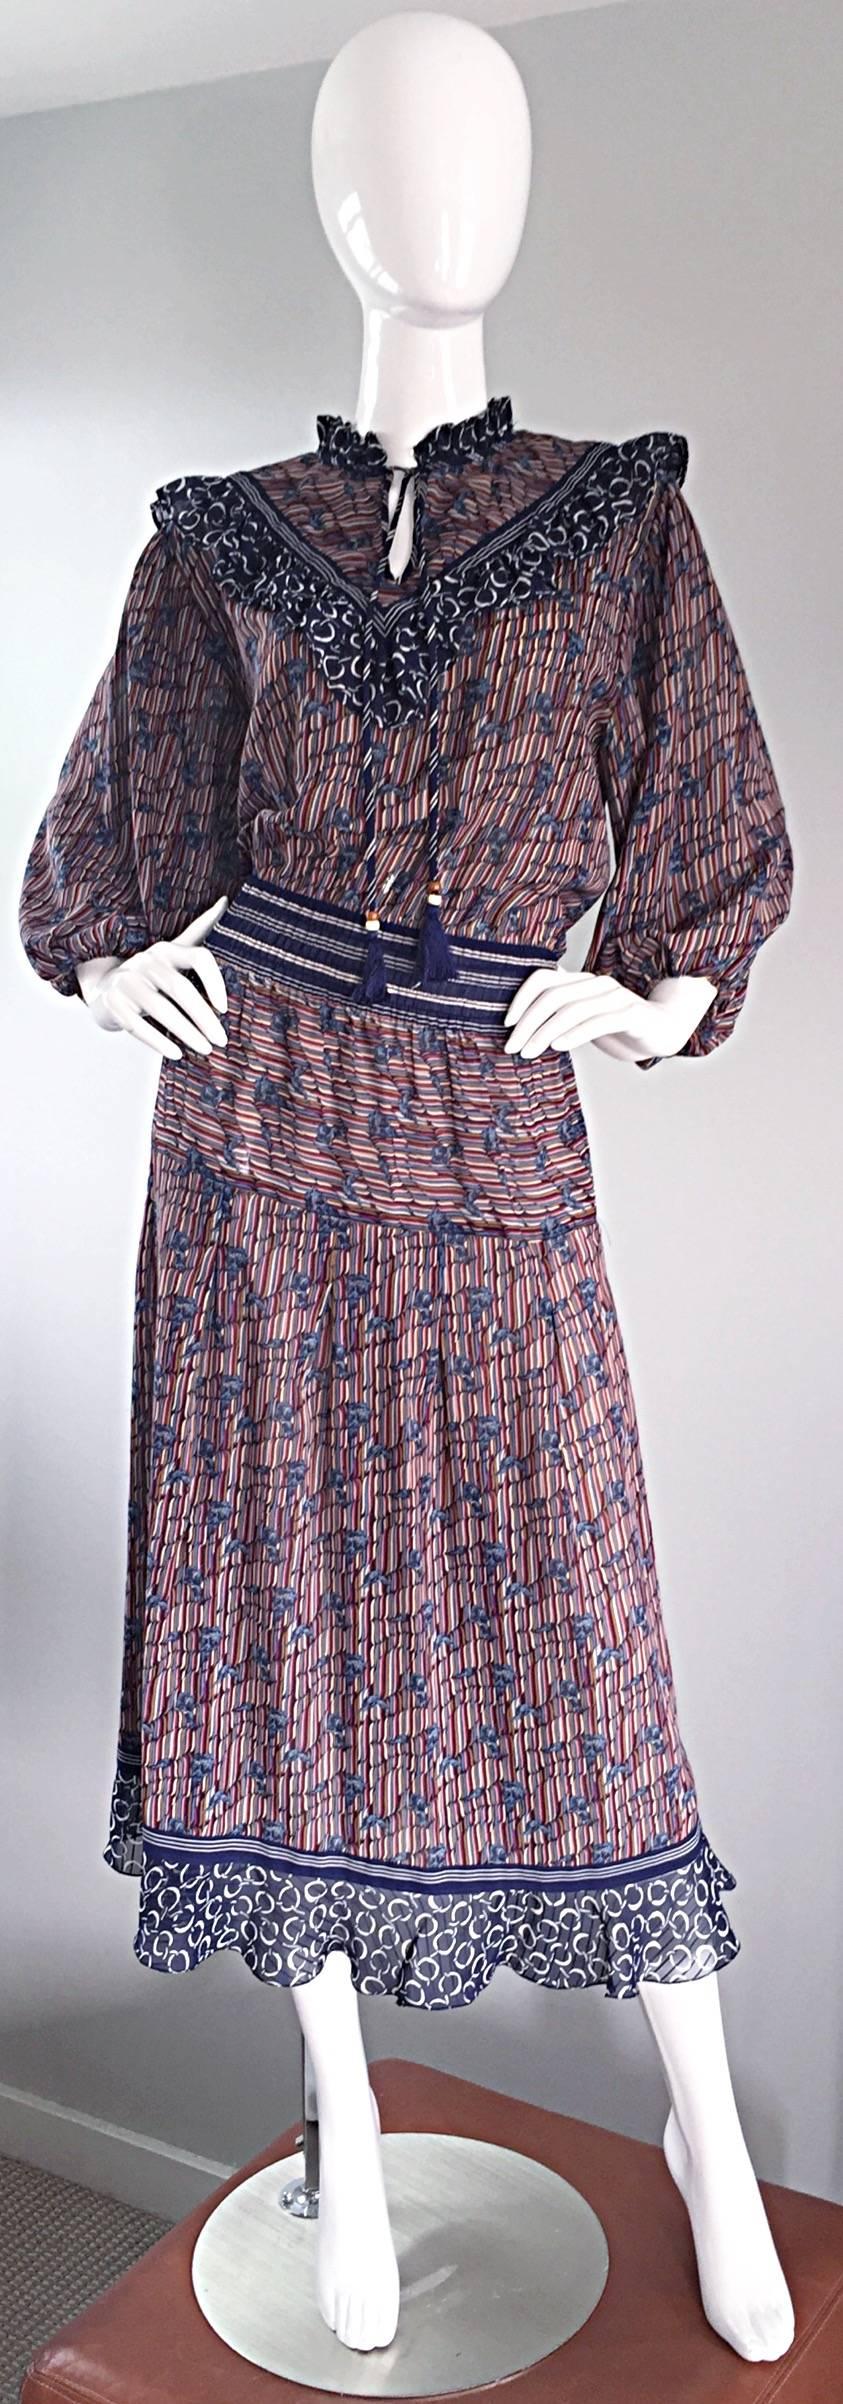 Awesome vintage Diane Freis ( Fres ) boho dress! Features horsebit and leaves printed throughout. Ruffle detail at neck, with attached tassels at each side, edged with beads and fringe, which can be left open, or tied close for a more conservative,